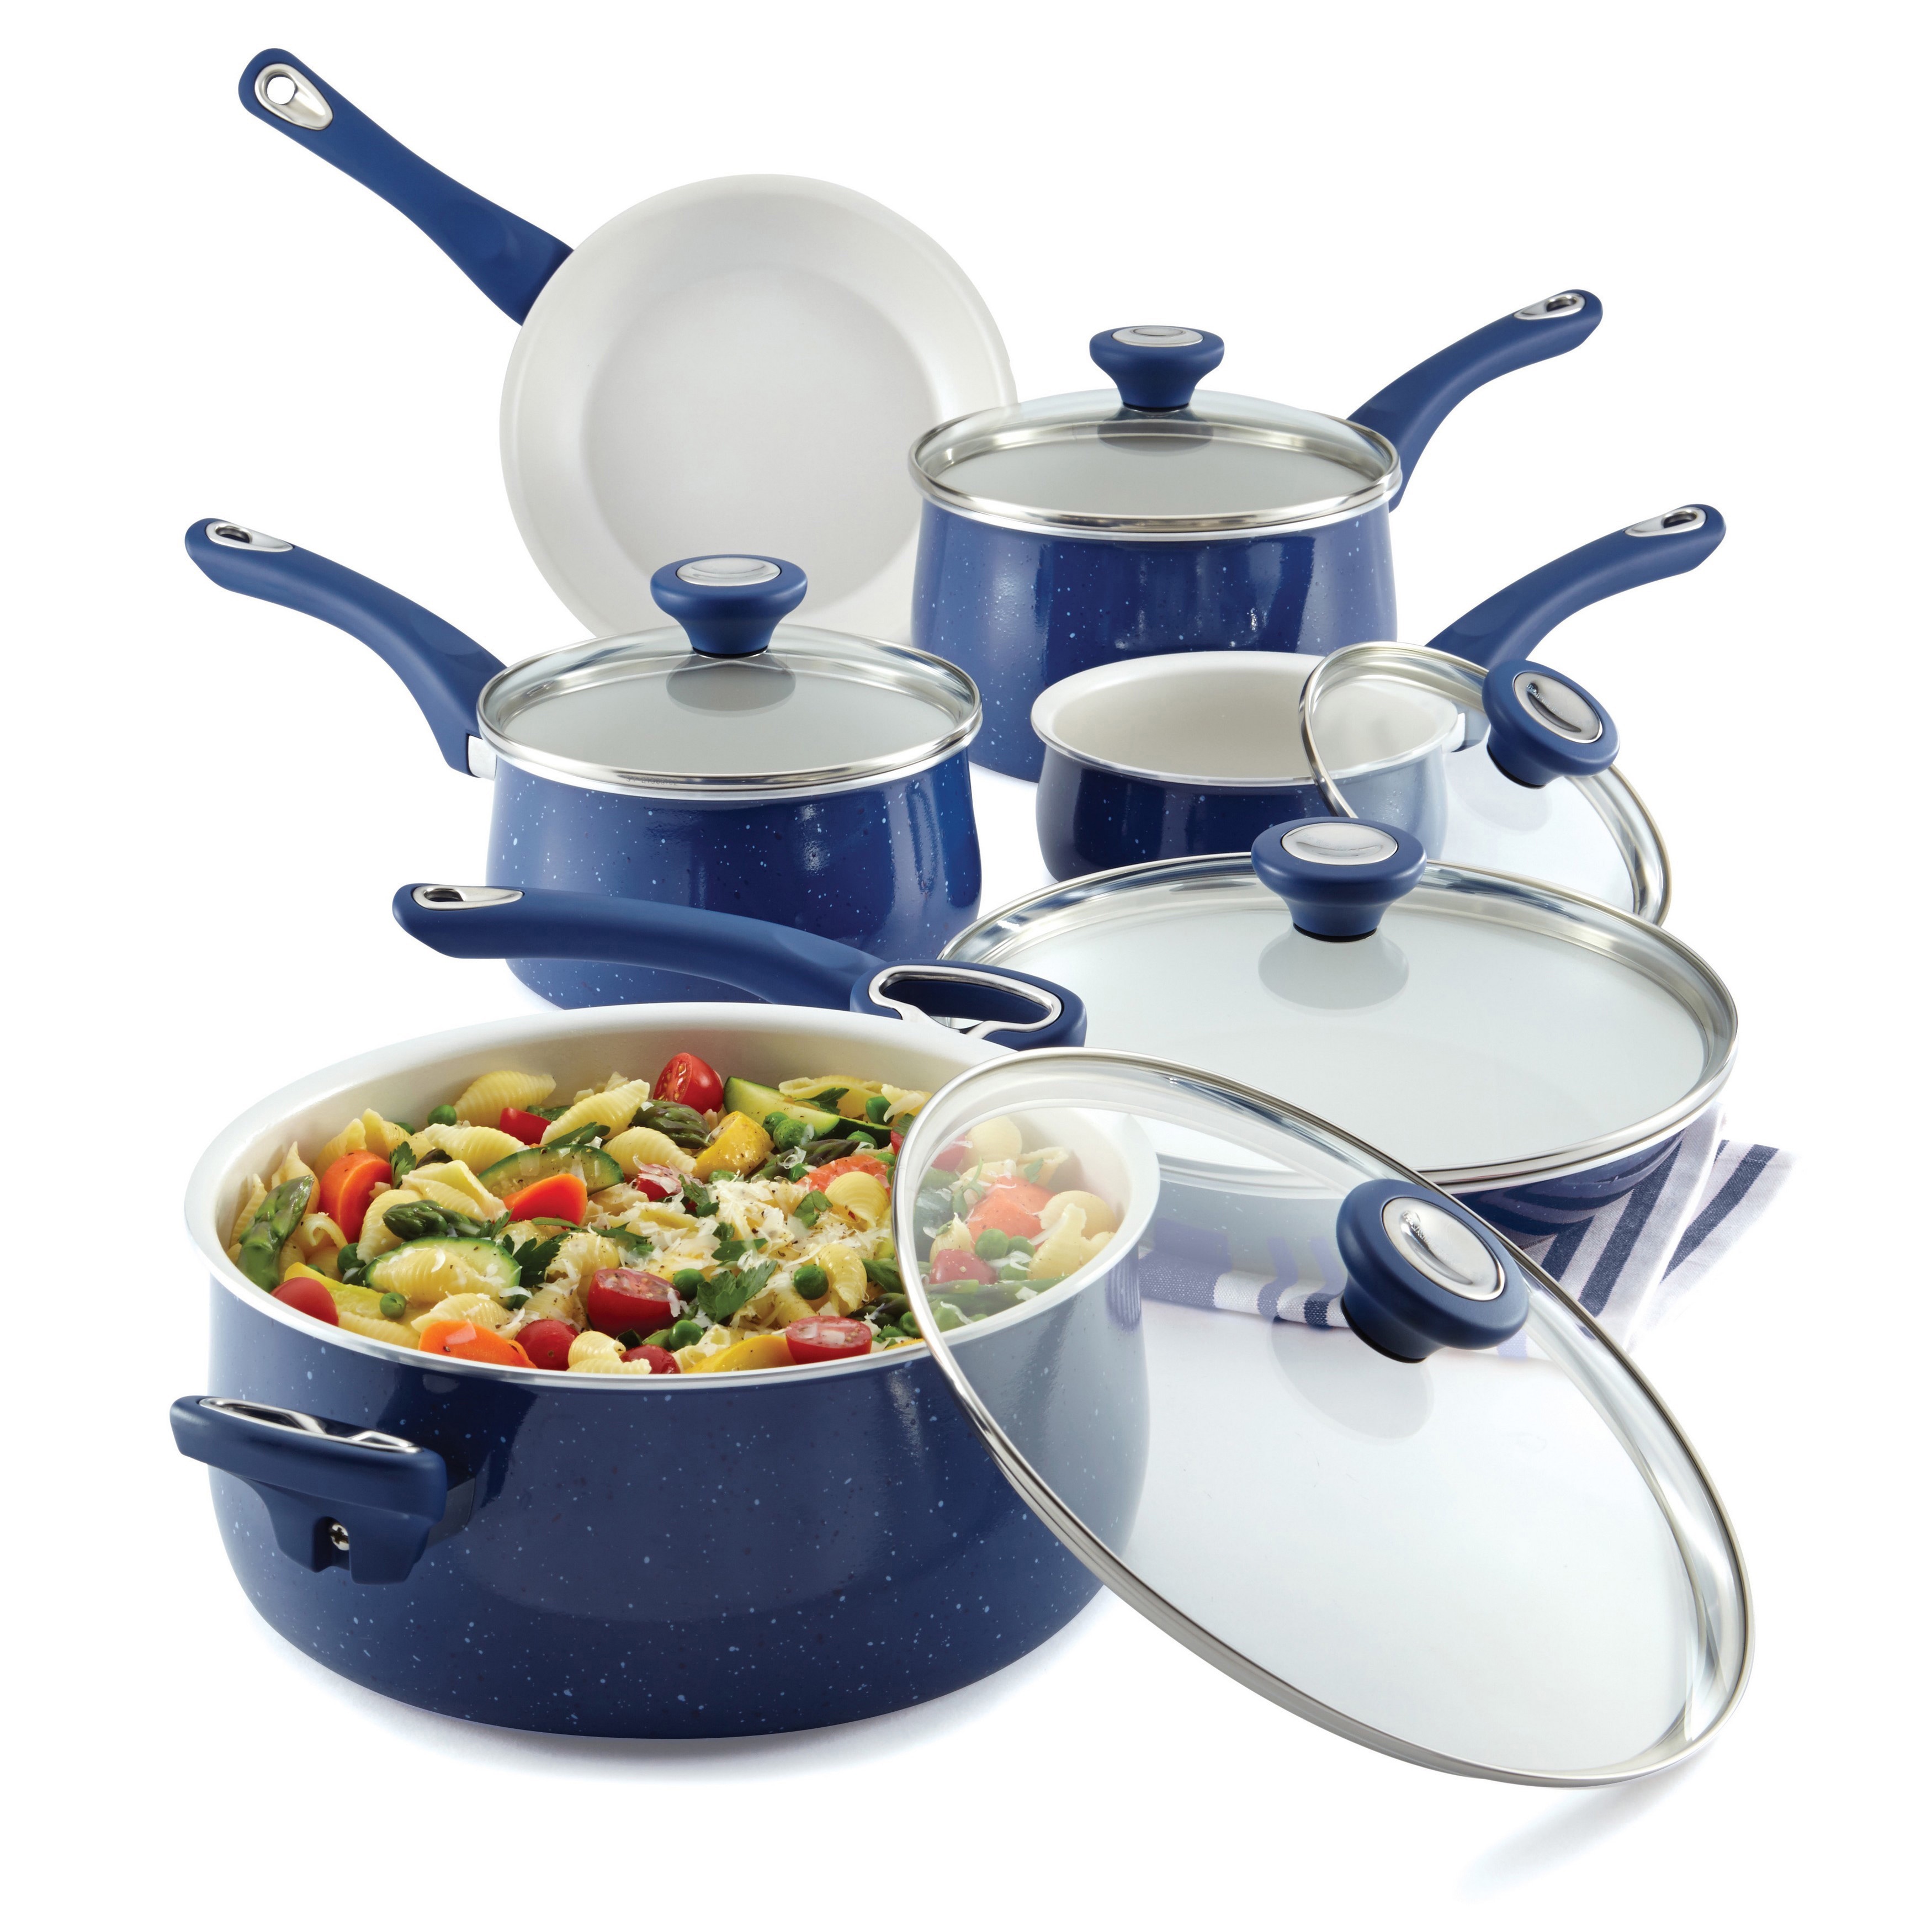 Farberware New Traditions Speckled Cookware Review - Consumer Reports